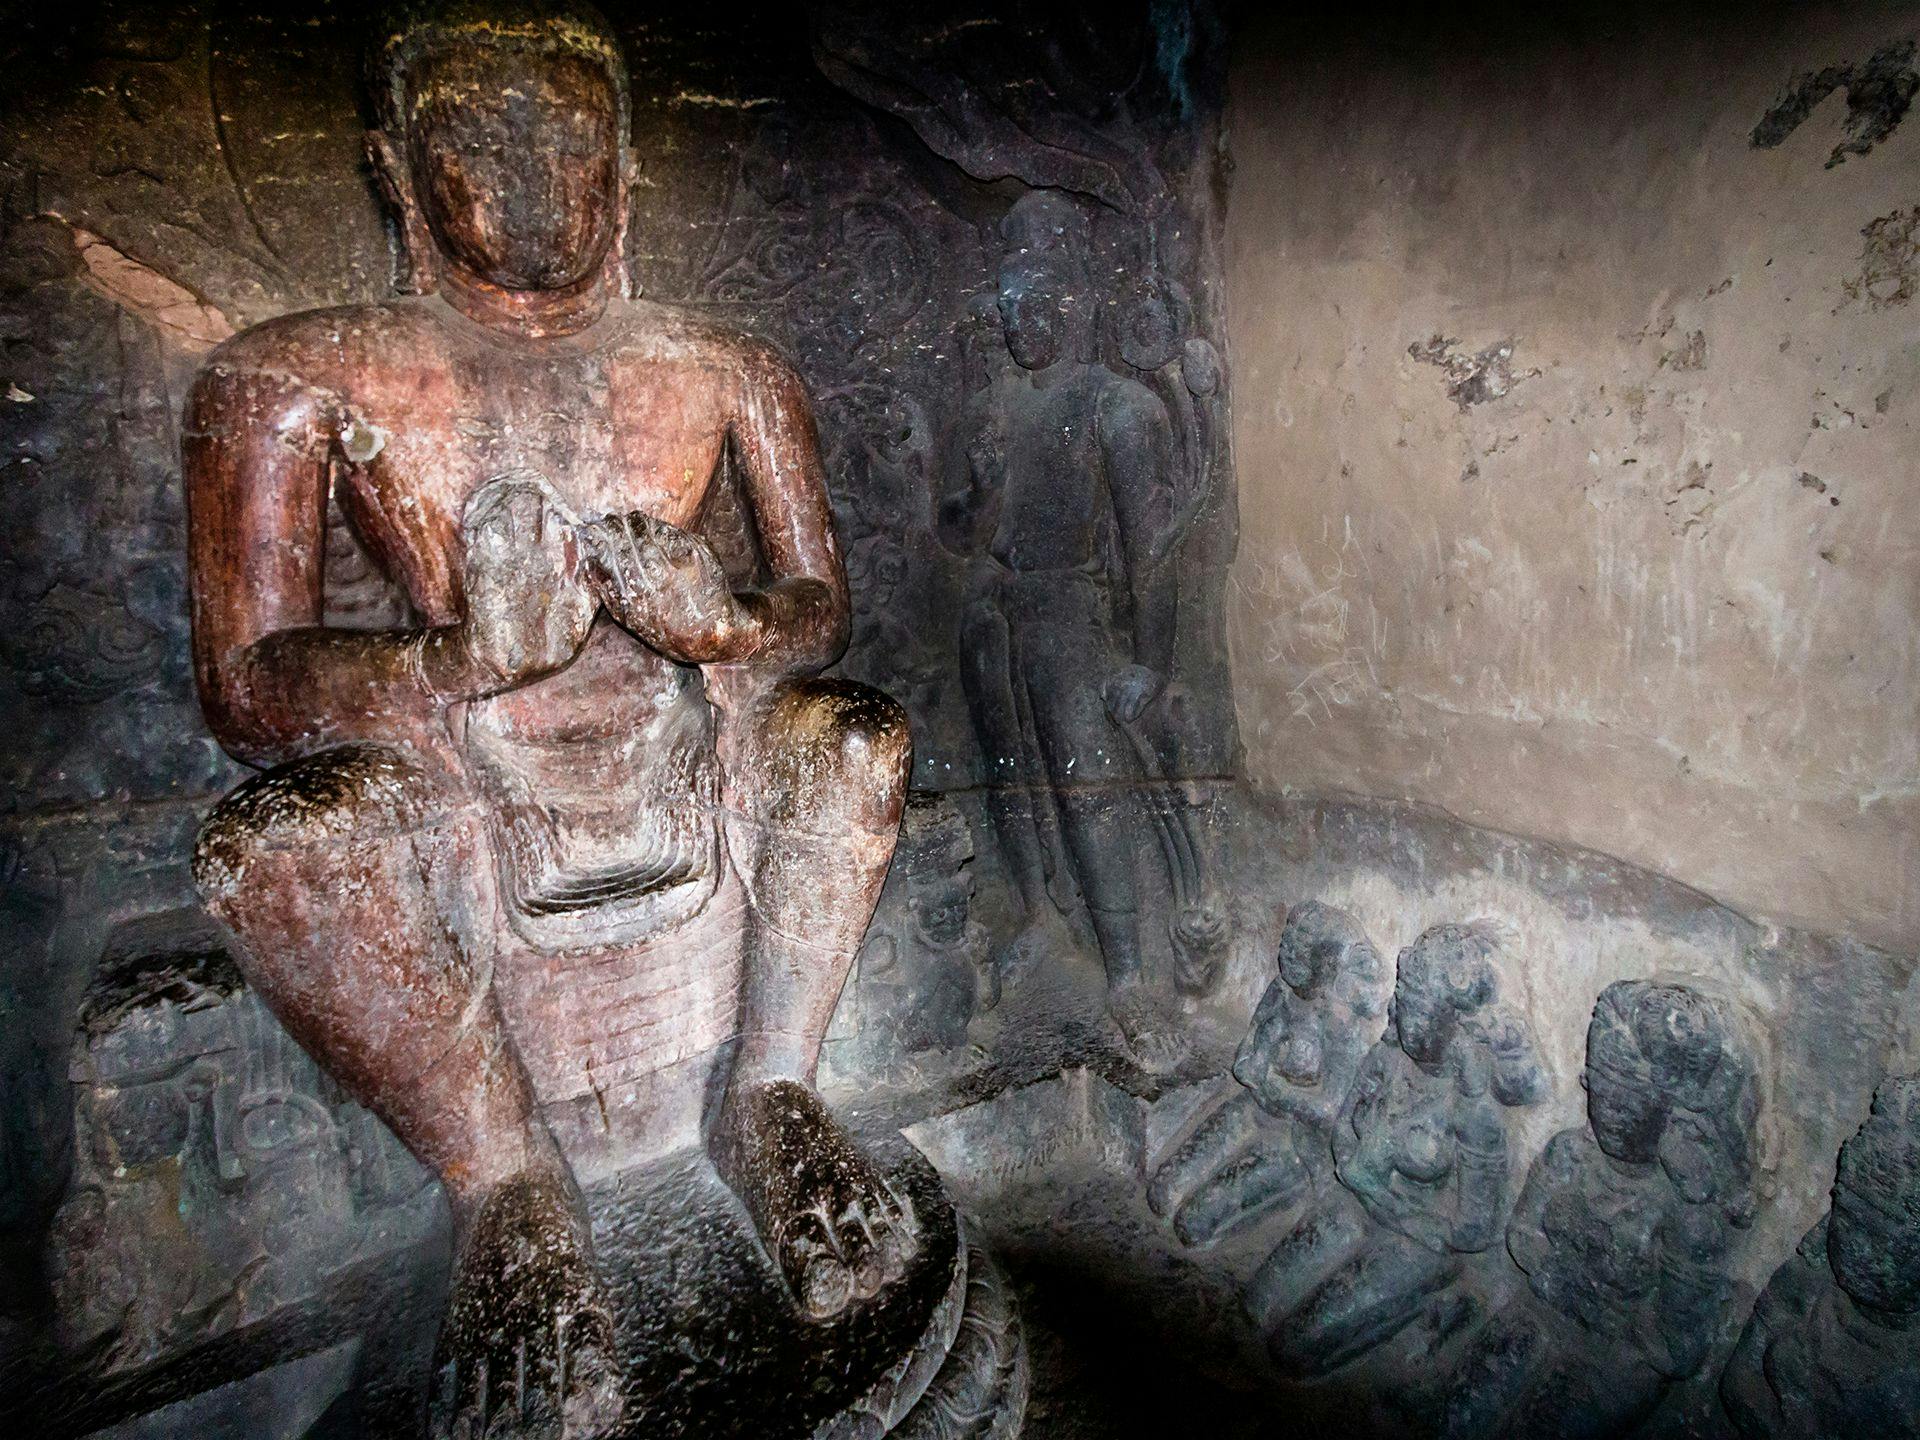 A seated Buddha sculpture in the caves